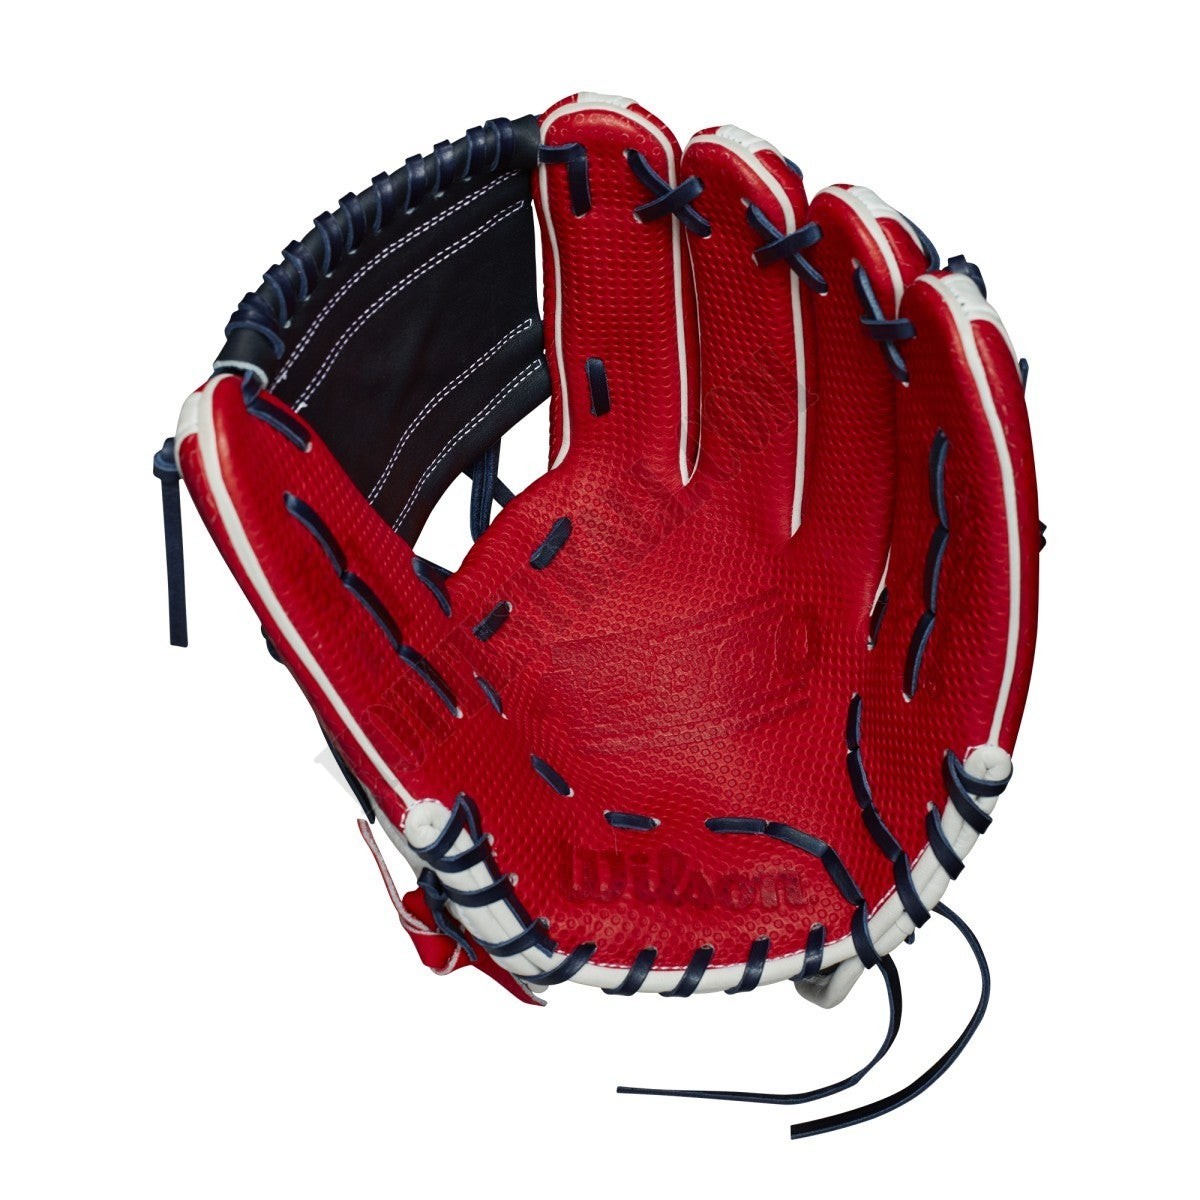 2021 A2000 KS7 GM 12" Infield Fastpitch Glove ● Wilson Promotions - -2